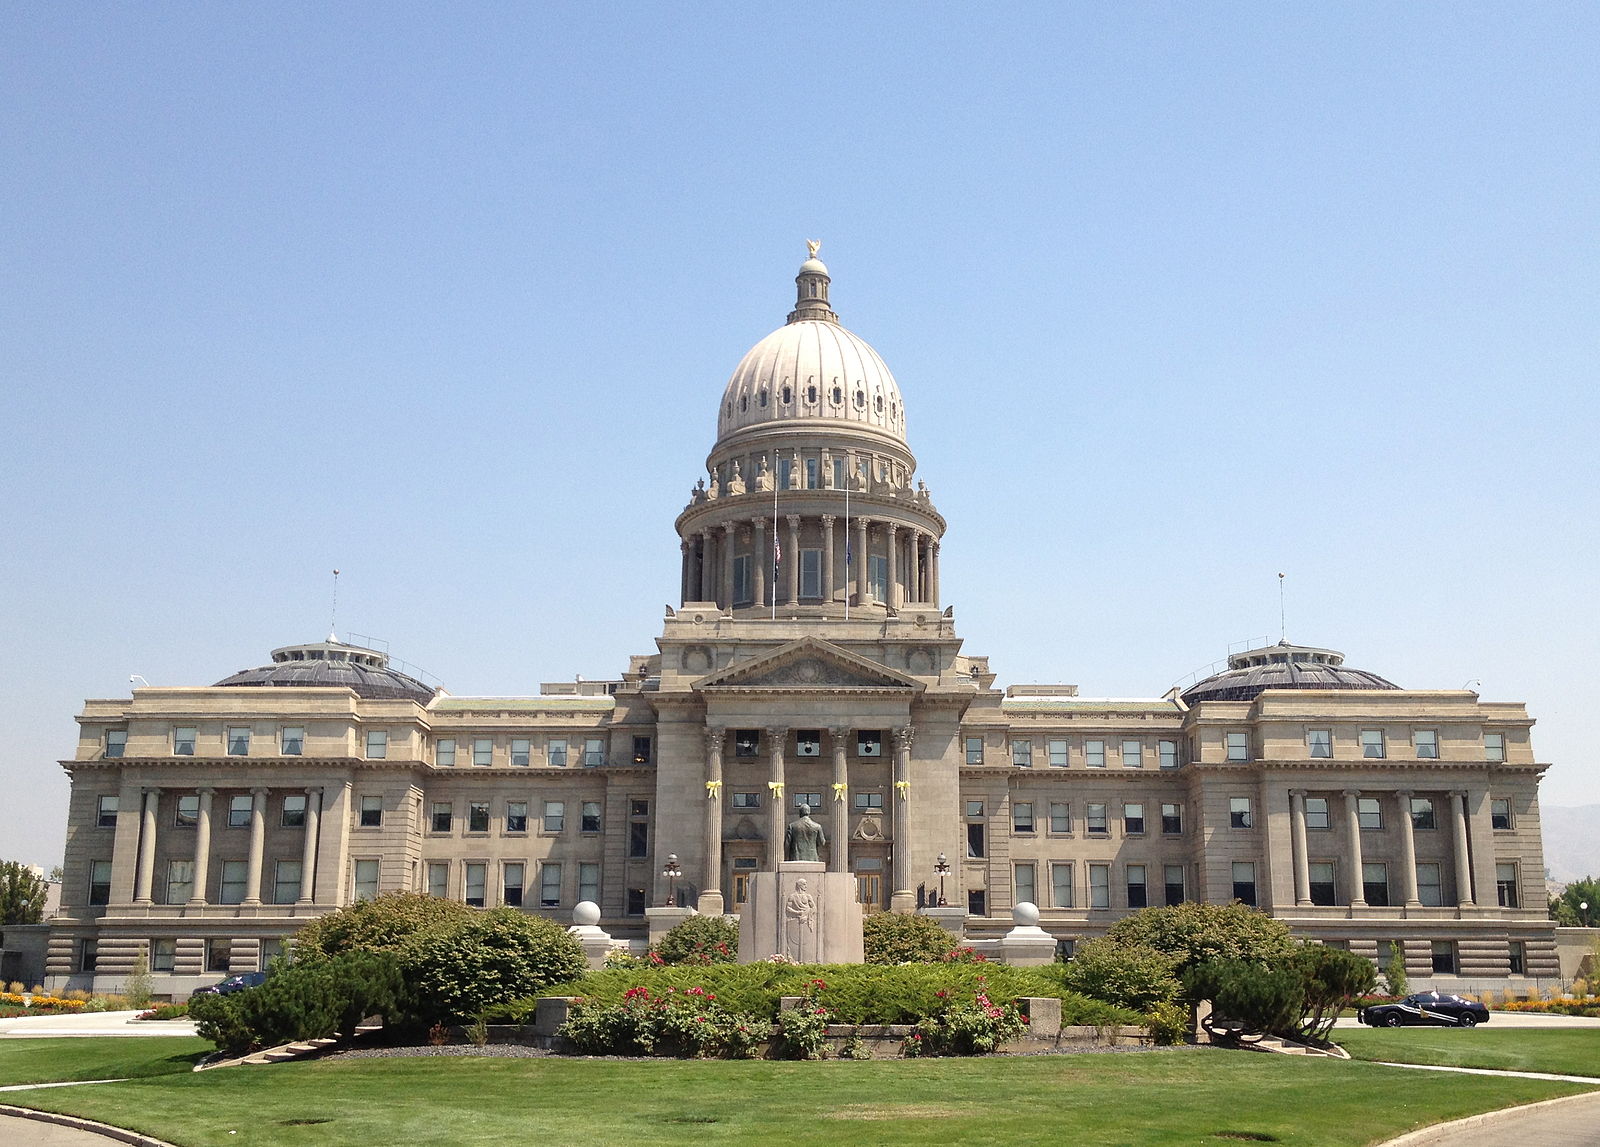 The Idaho state capitol building